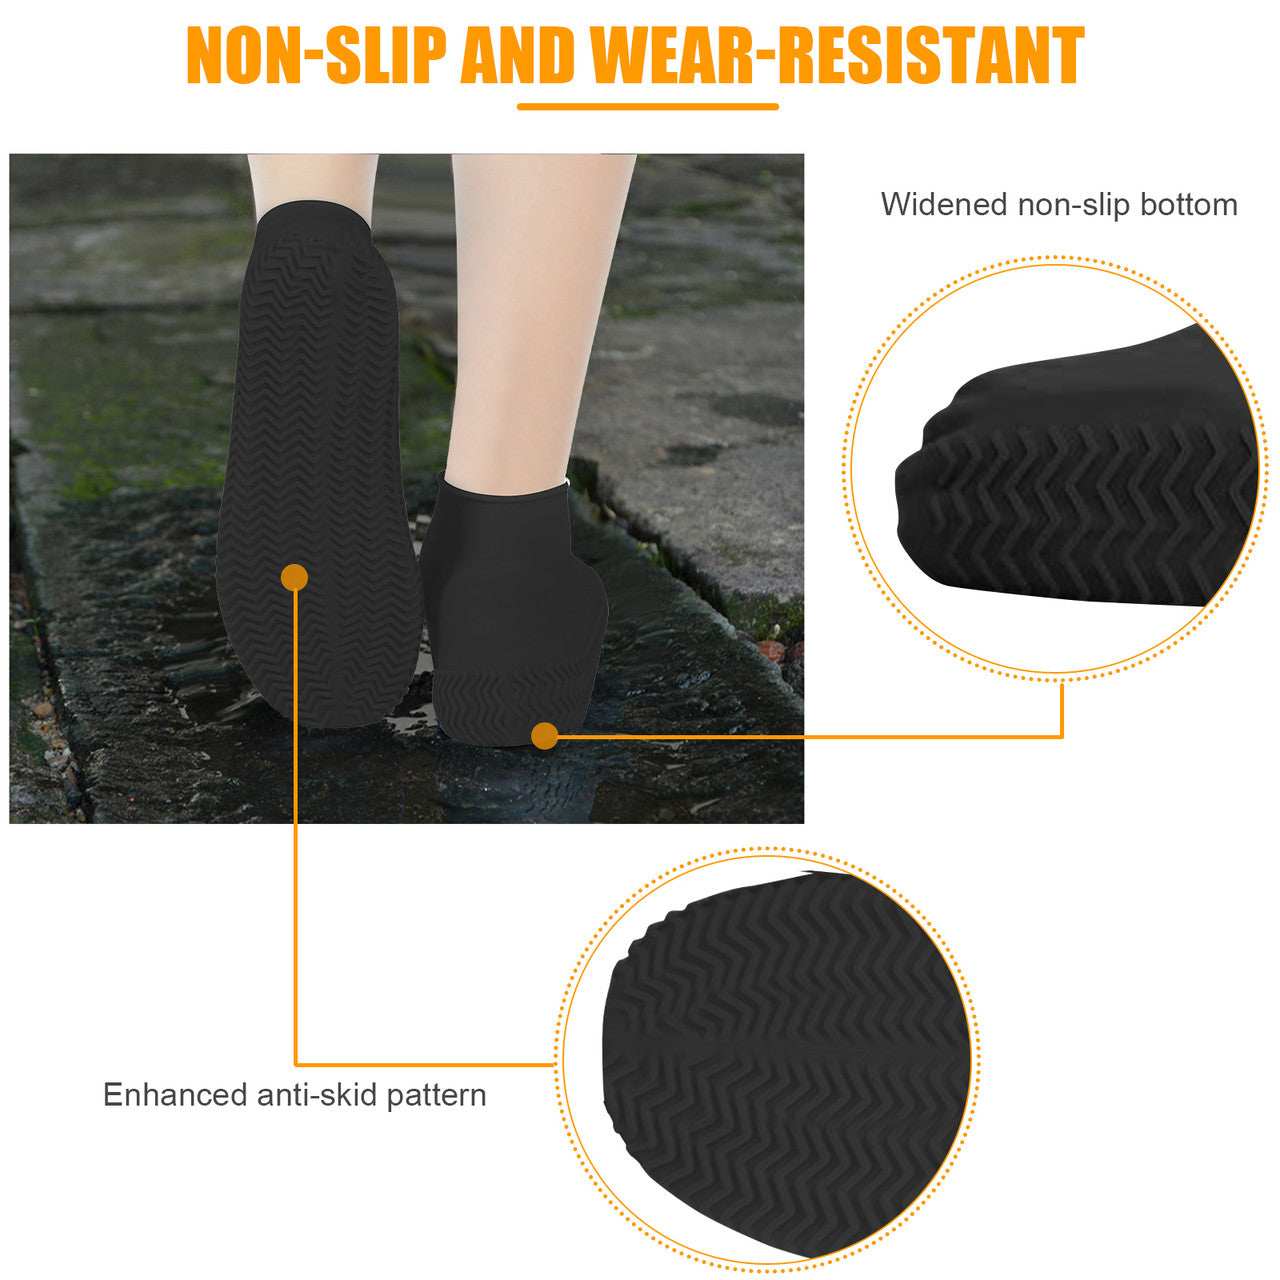 Waterproof Silicone Rain Shoe Cover - Non Slip,Water Resistant,Reusable,Stretchable,Foldable Size XL (Black)